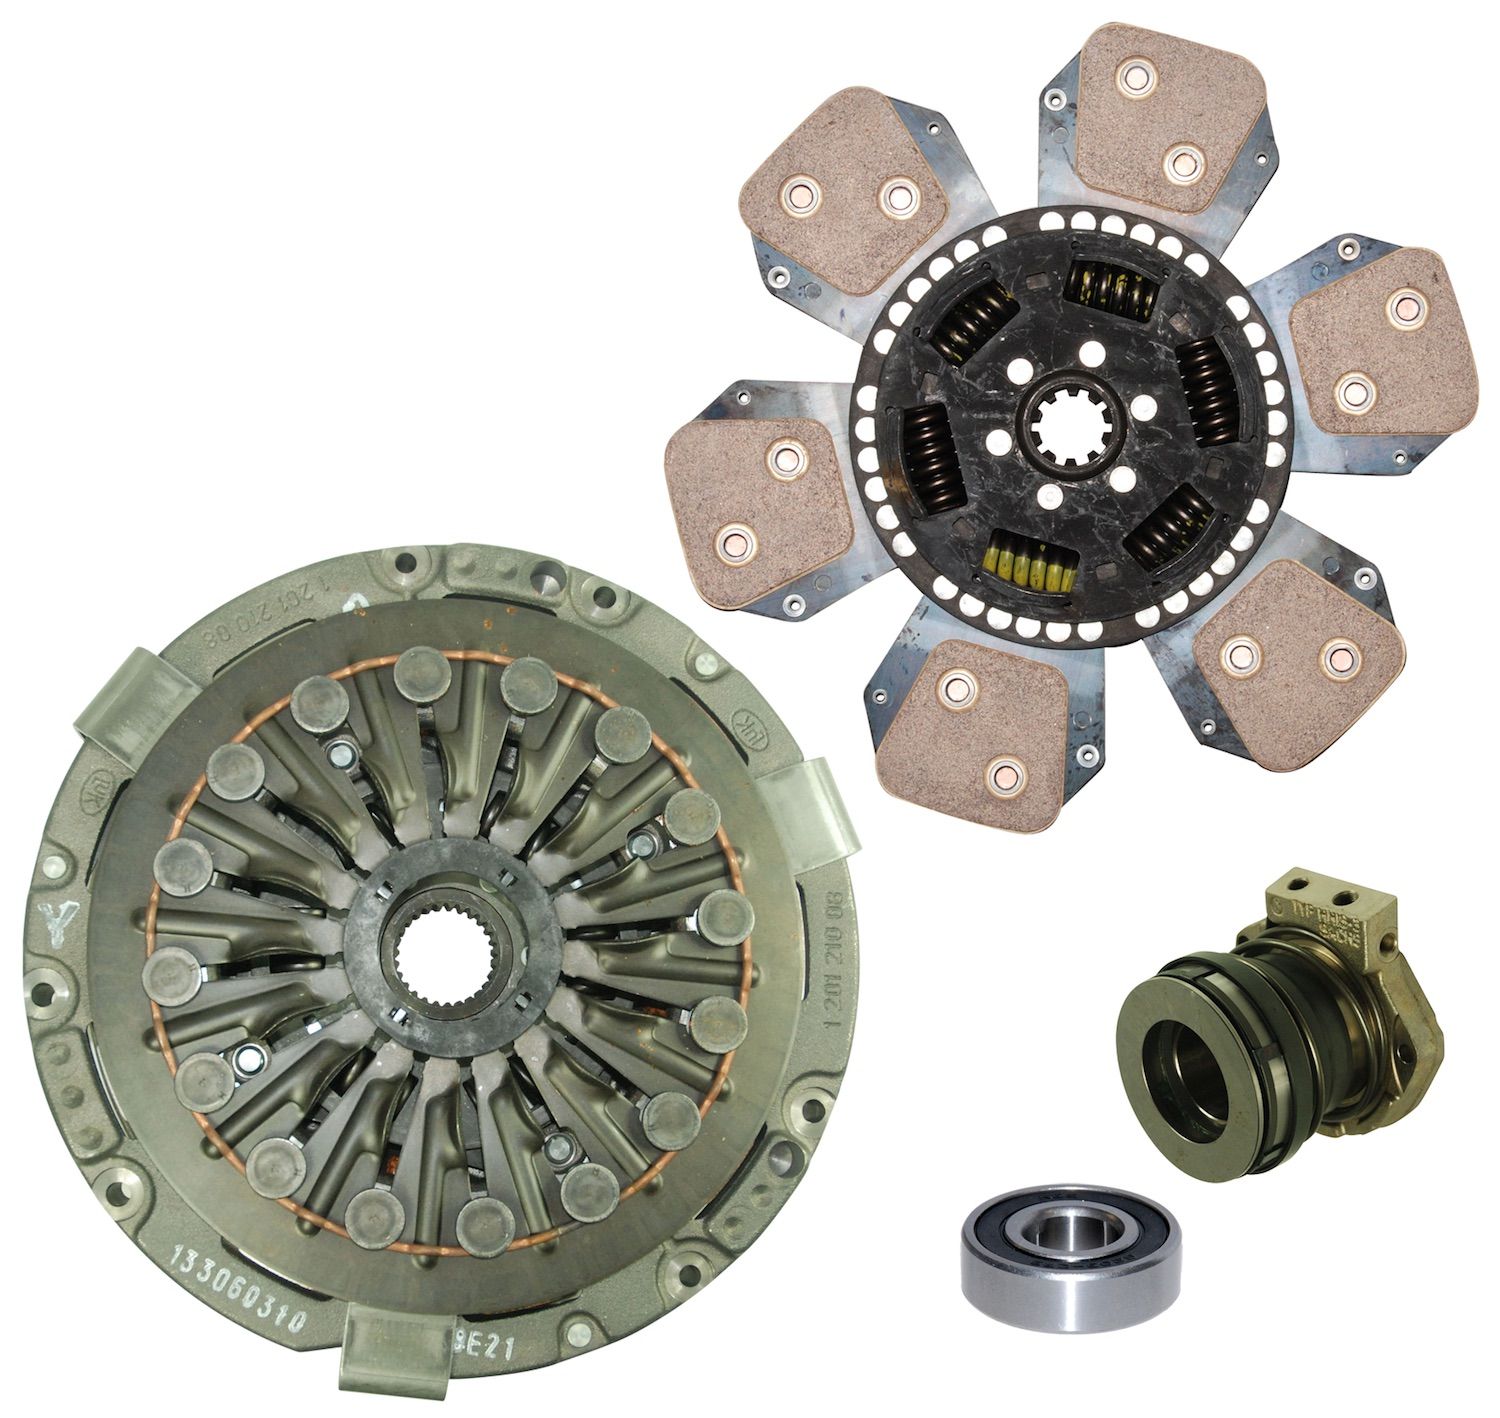 Clutch parts for John Deere 3650 (50 Series) - Nick Young ...